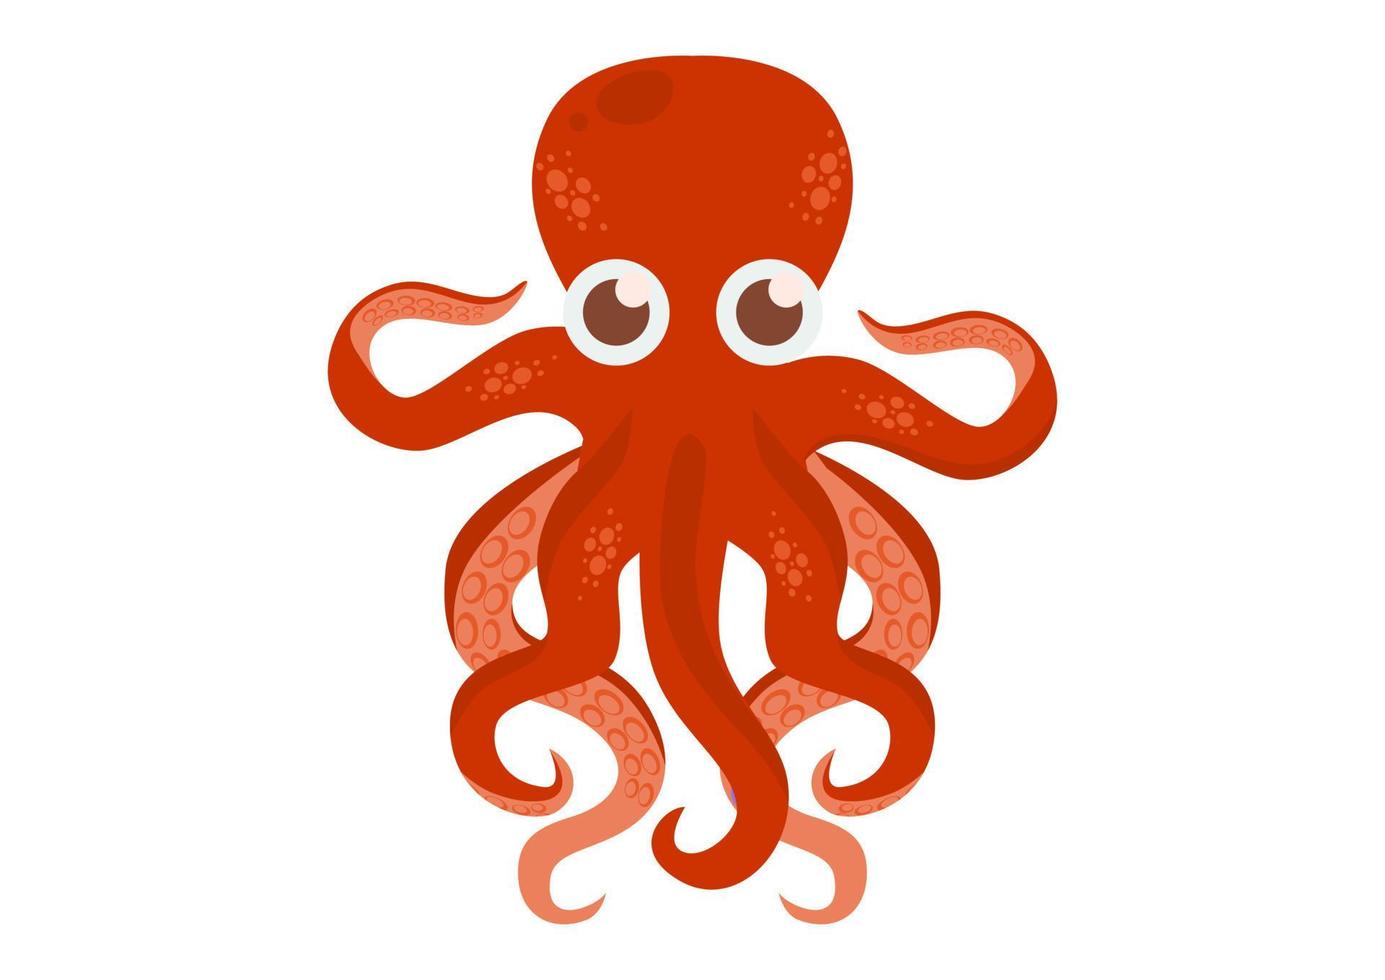 Cute Octopus Cartoon Vector Graphics. Squid on white background